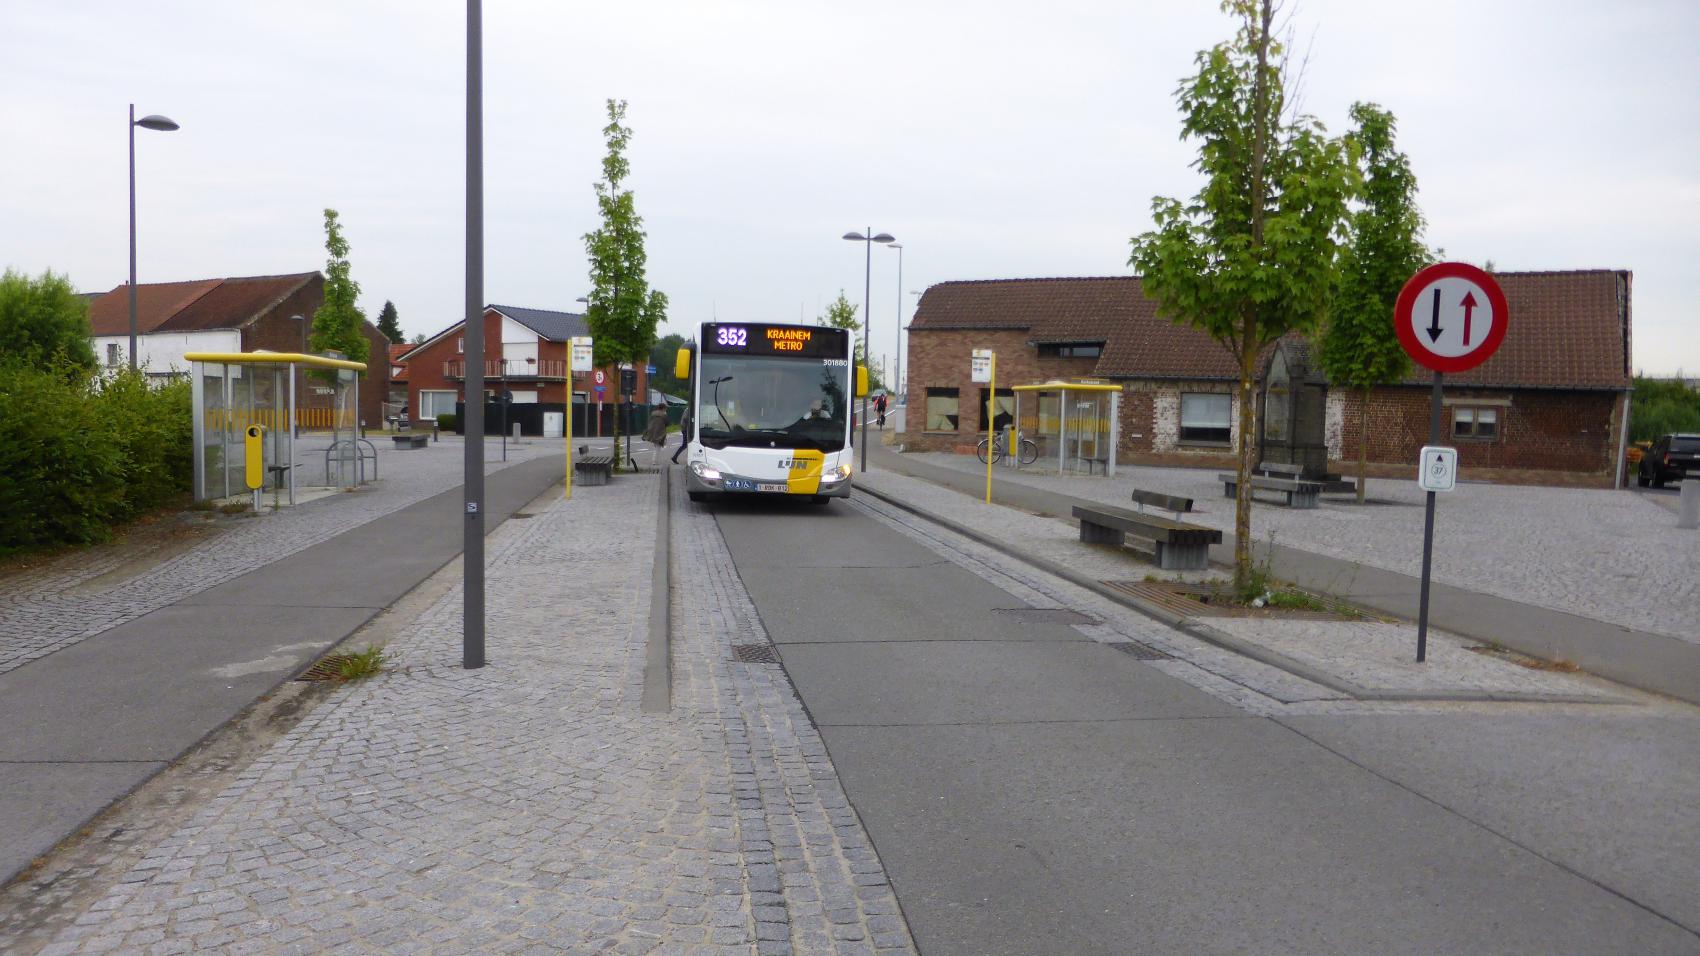 When the bus stops, cars driving in both directions must wait and pedestrians can safely cross the carriageway. Cycle traffic is not interrupted.